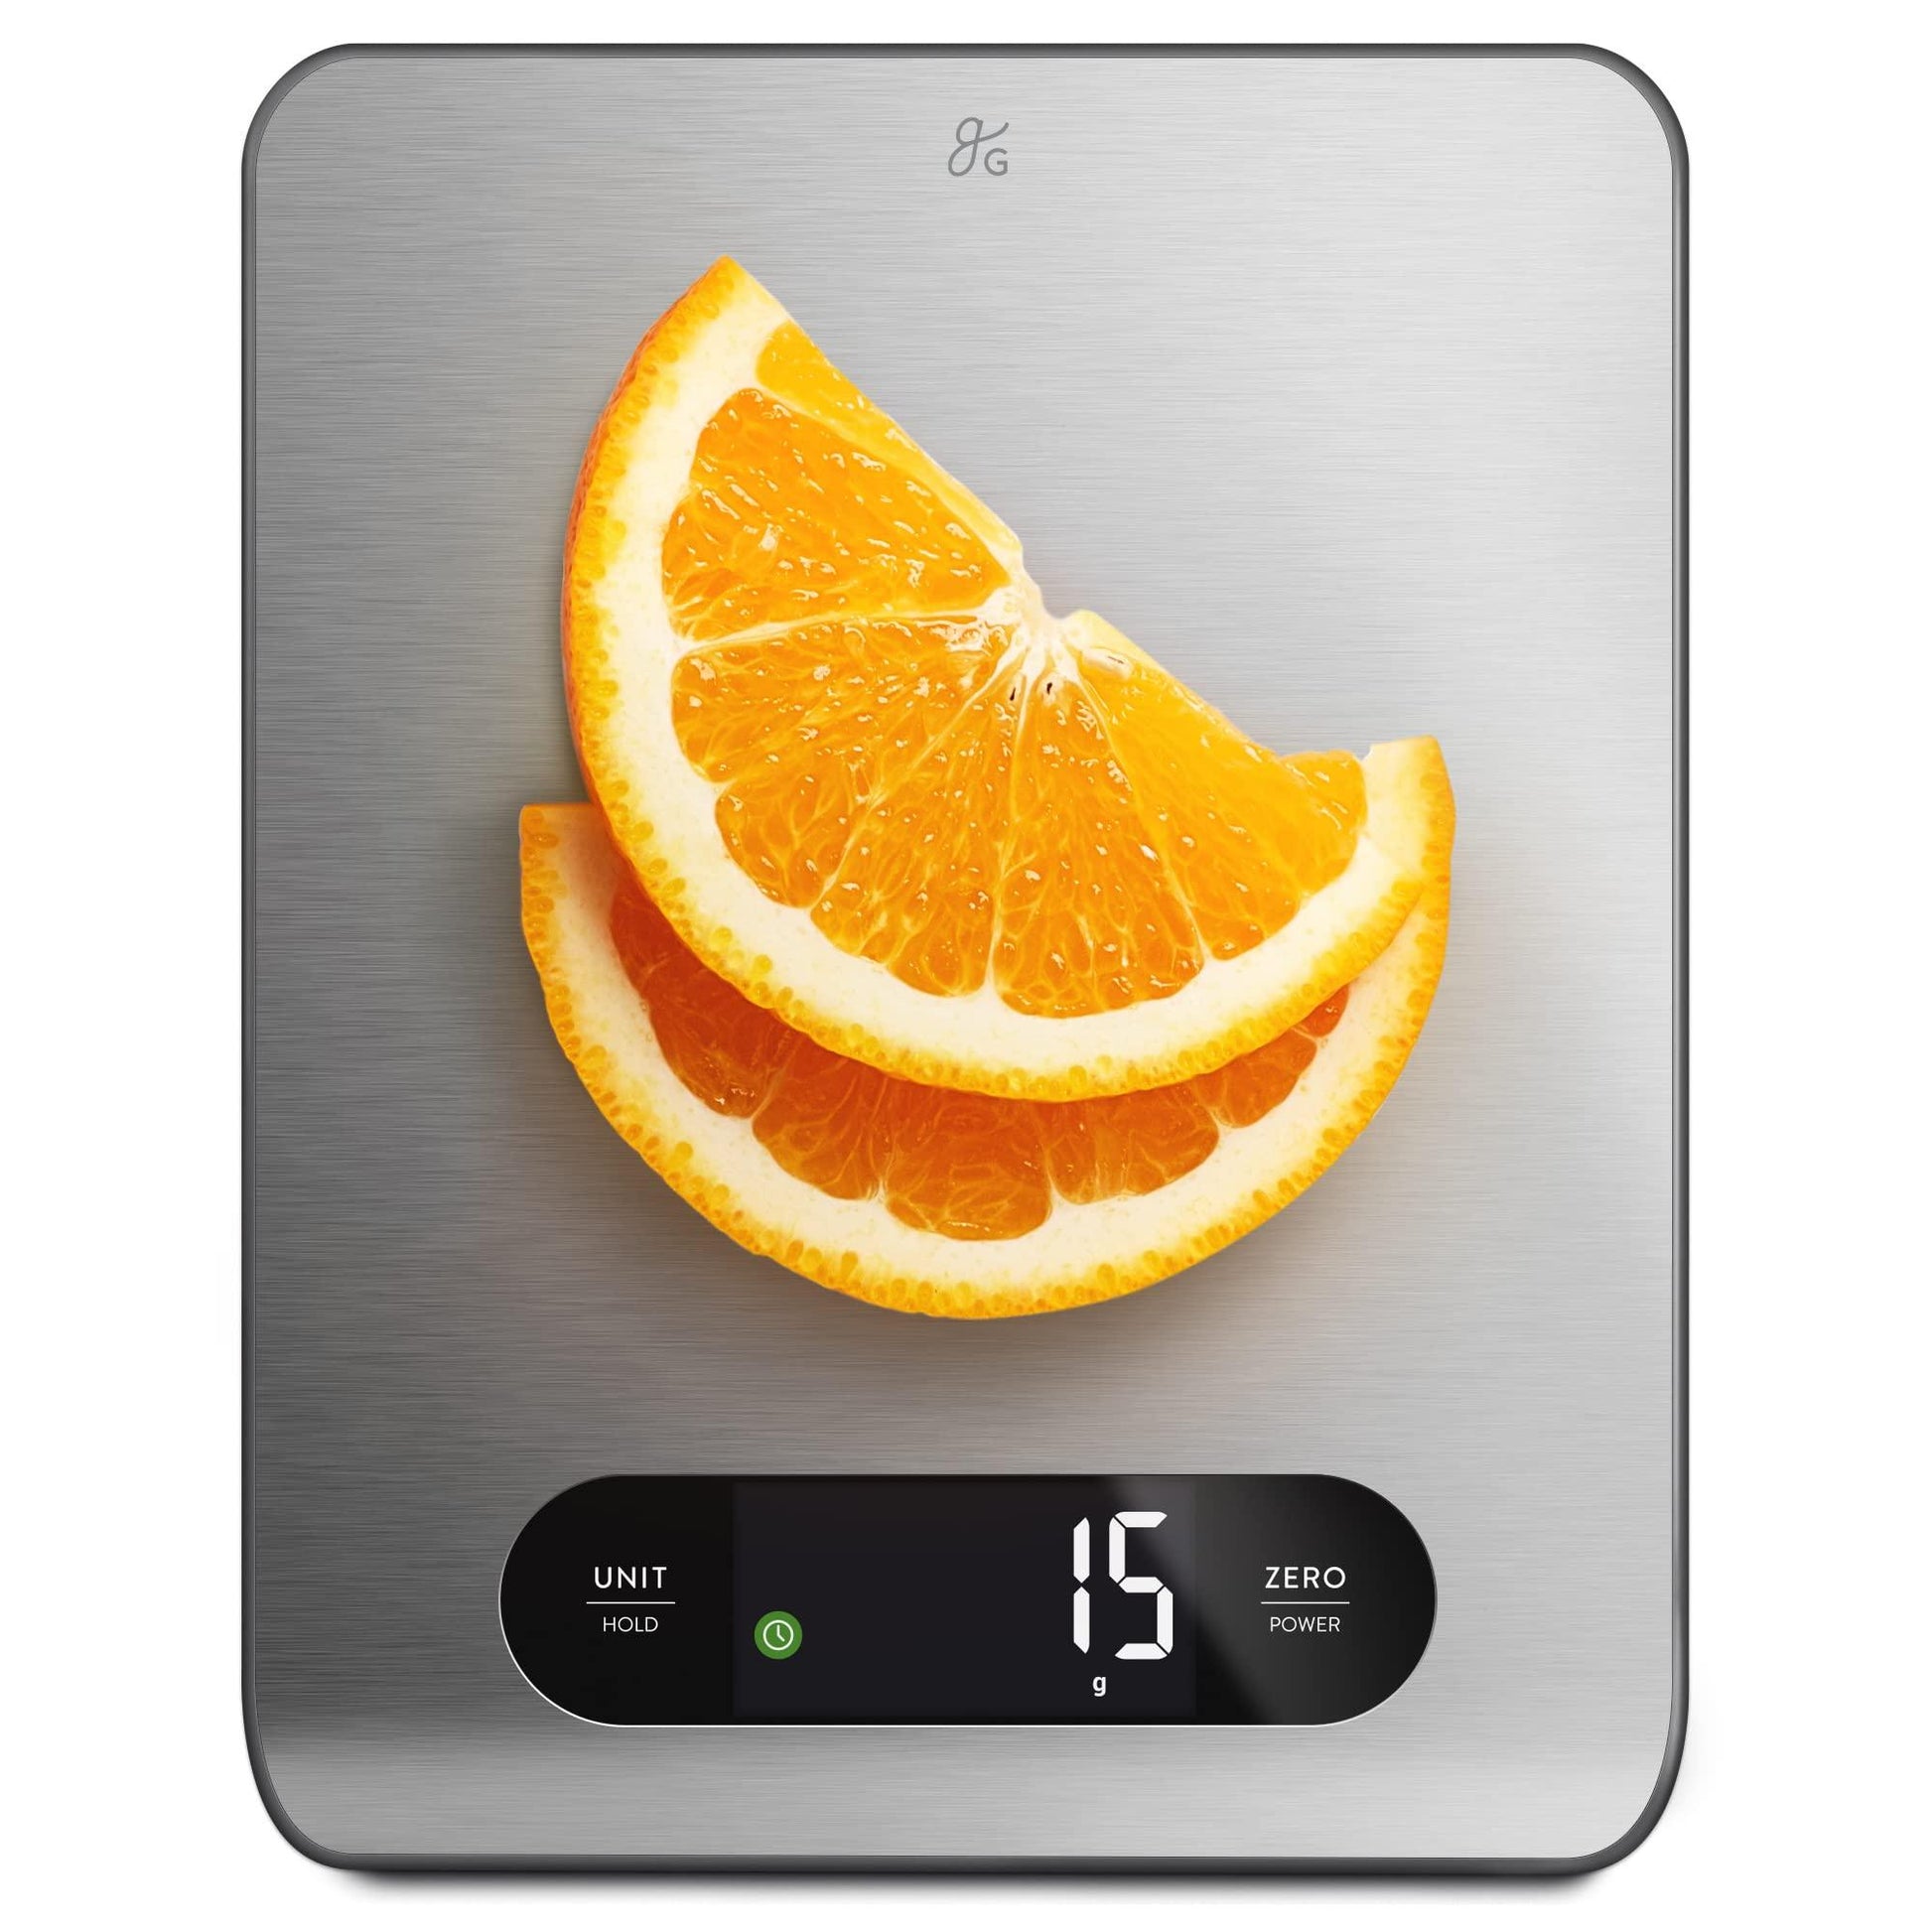 Greater Goods Stainless Steel Food Scale - A Premium Kitchen Scale That Weighs in Grams, Ounces, Fluid Ounces, and Milliliters | Hi-Def LCD Screen and Easy-to-Store Size | Designed in St. Louis - CookCave